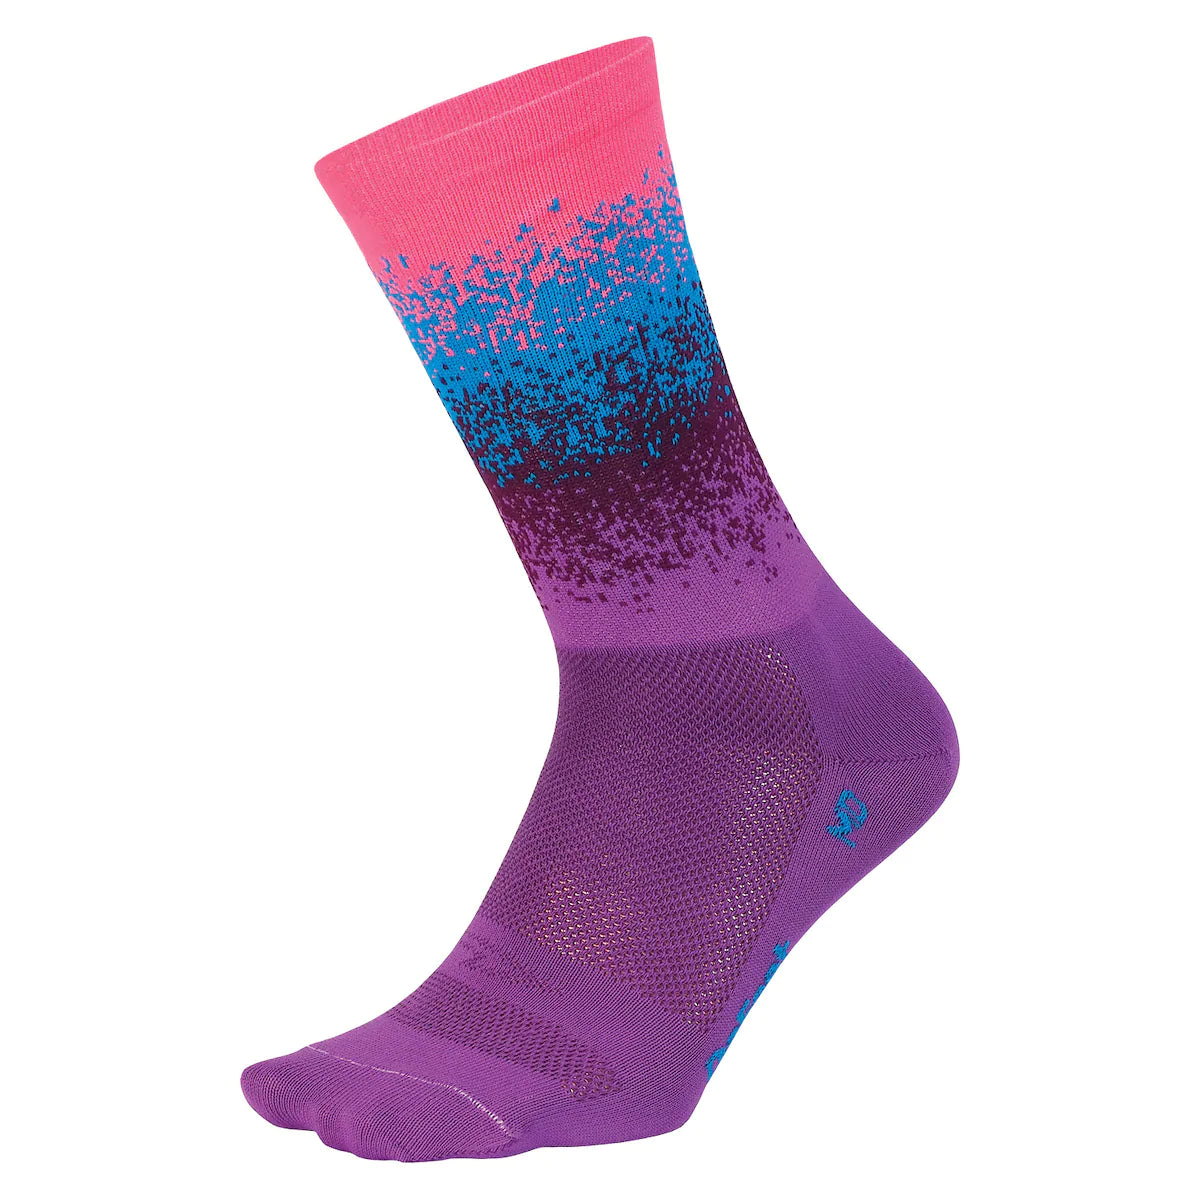 DeFeet Aireator Barnstormer Ombre cycling sock featuring a 6" cuff and a design of several bands of shades of bright pink fading into blue and purple..